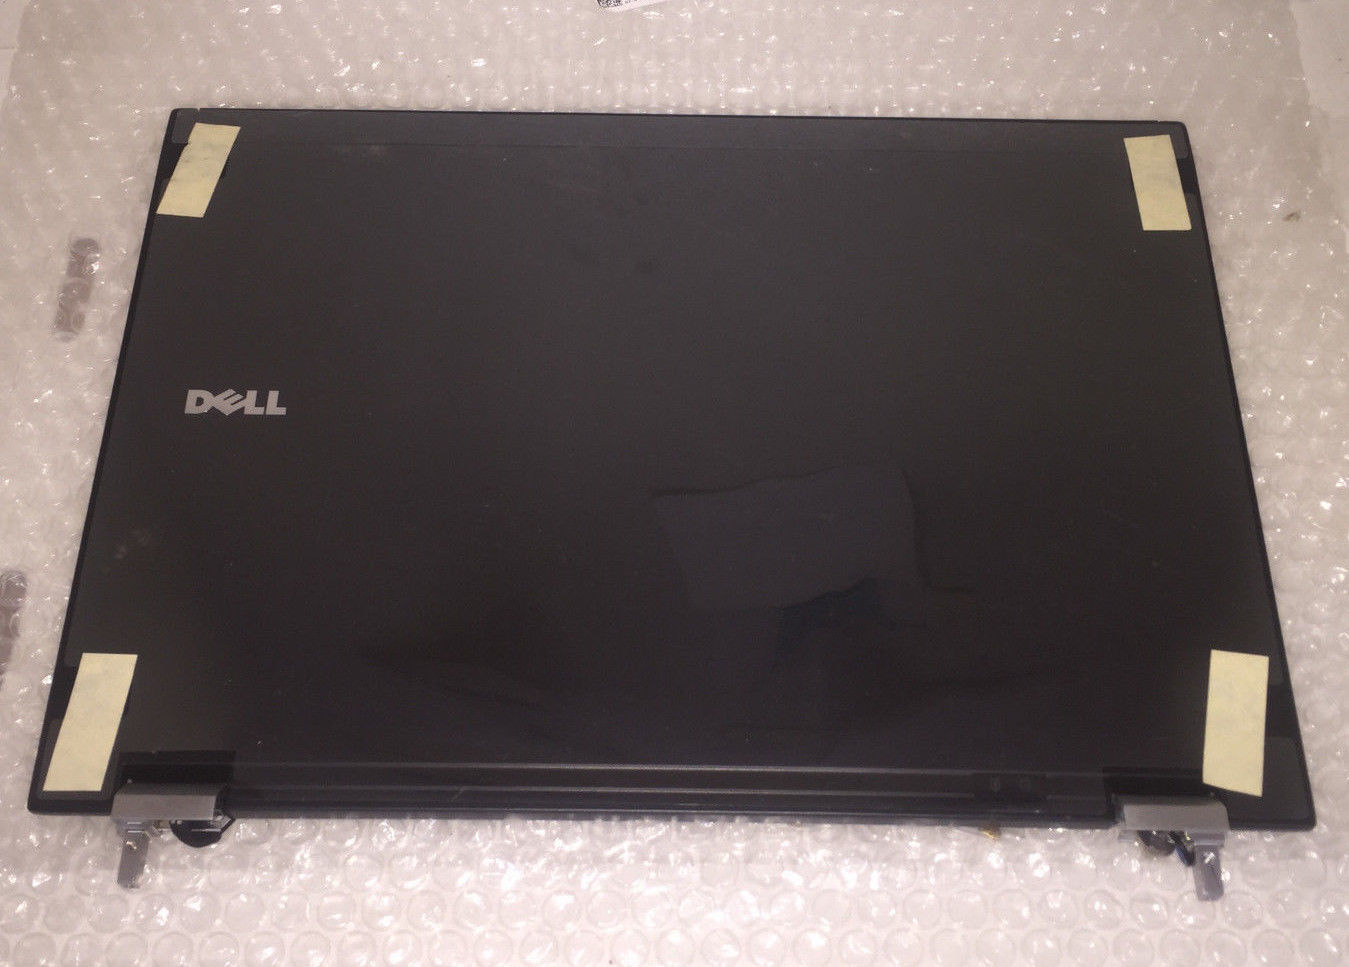 Lot of 2 NEW Genuine Dell Latitude E6400 LCD Back Cover W/ Hinges R150P K802R